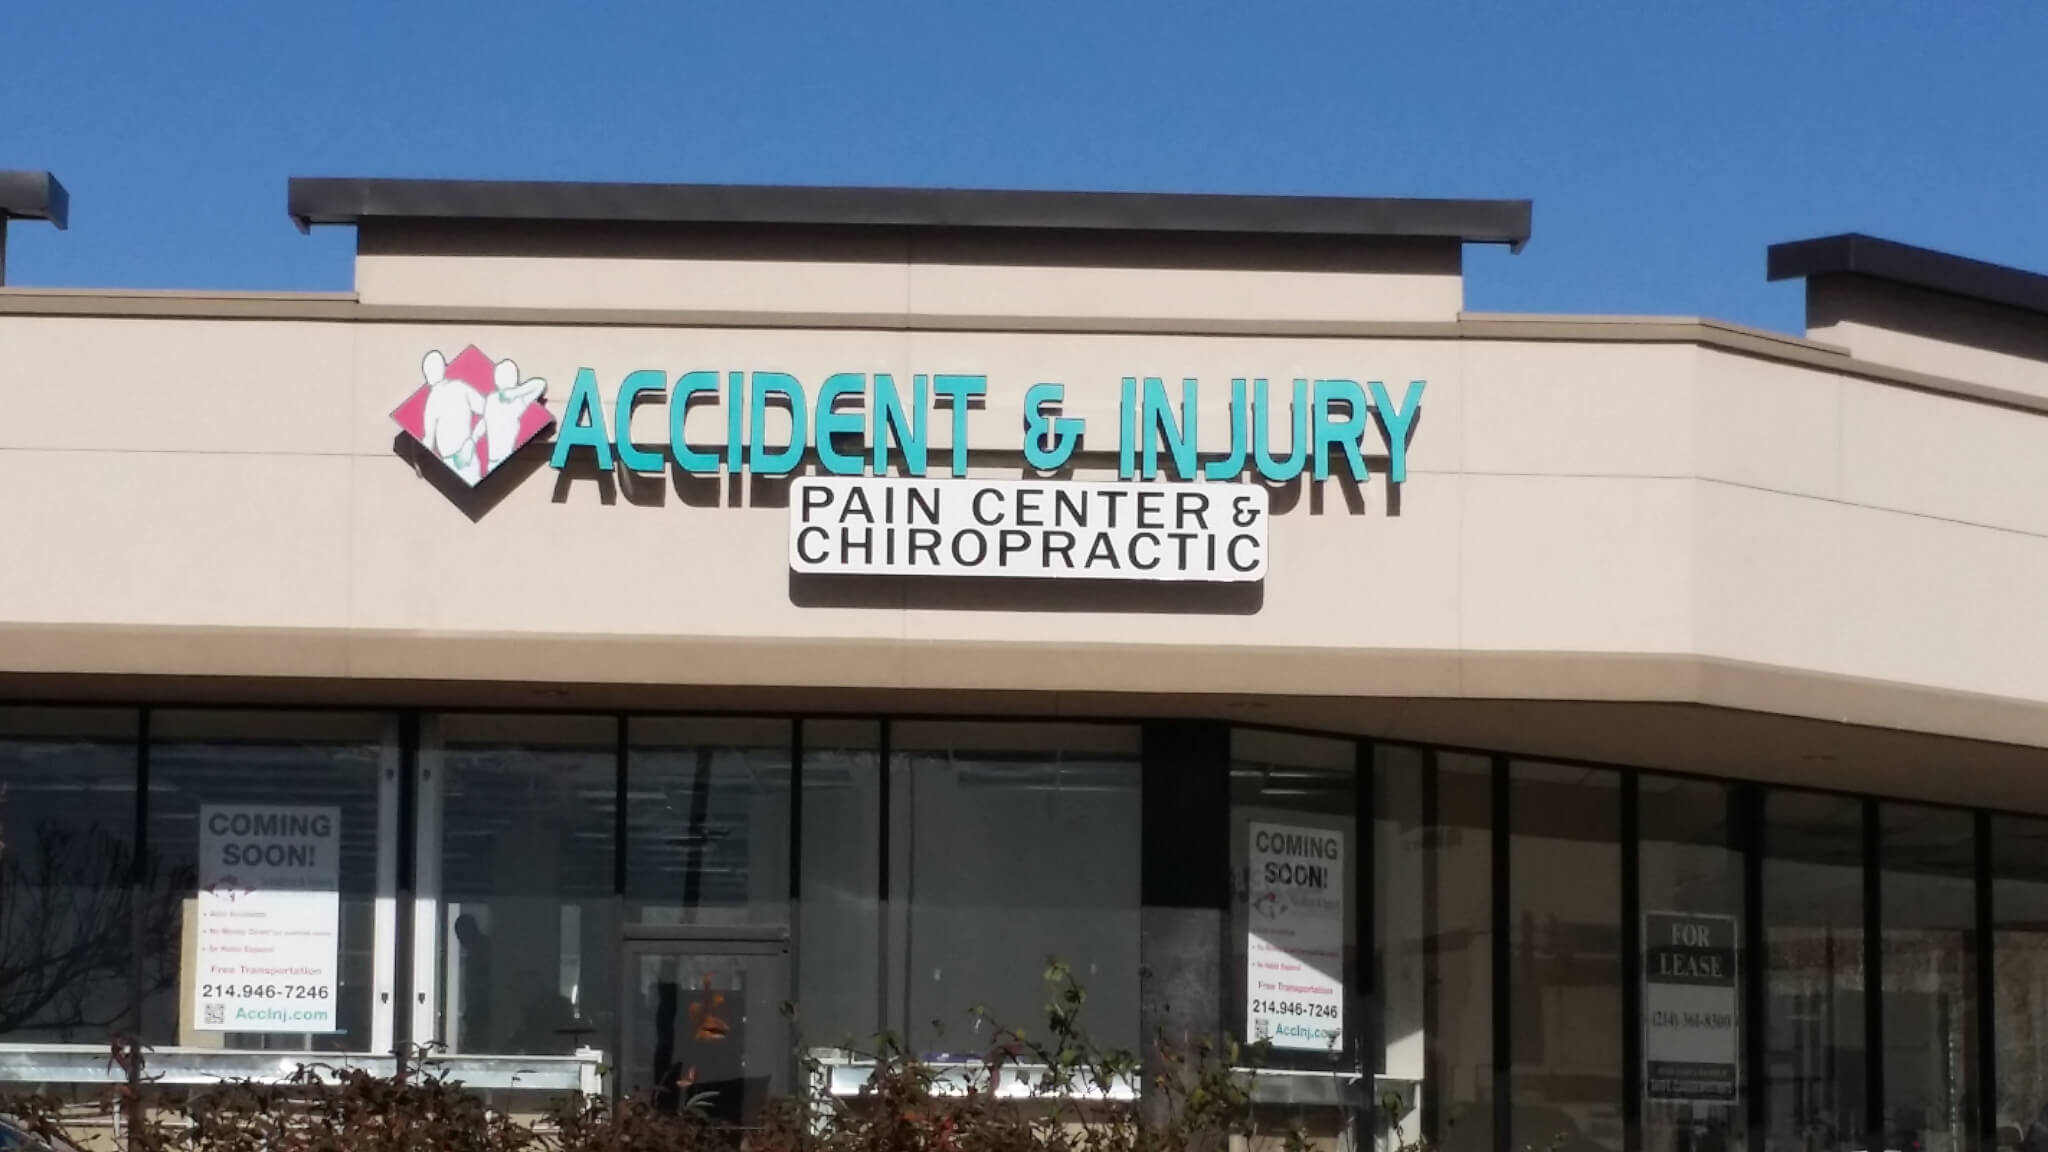 Accident & Injury Pain Center & Chiropractic 